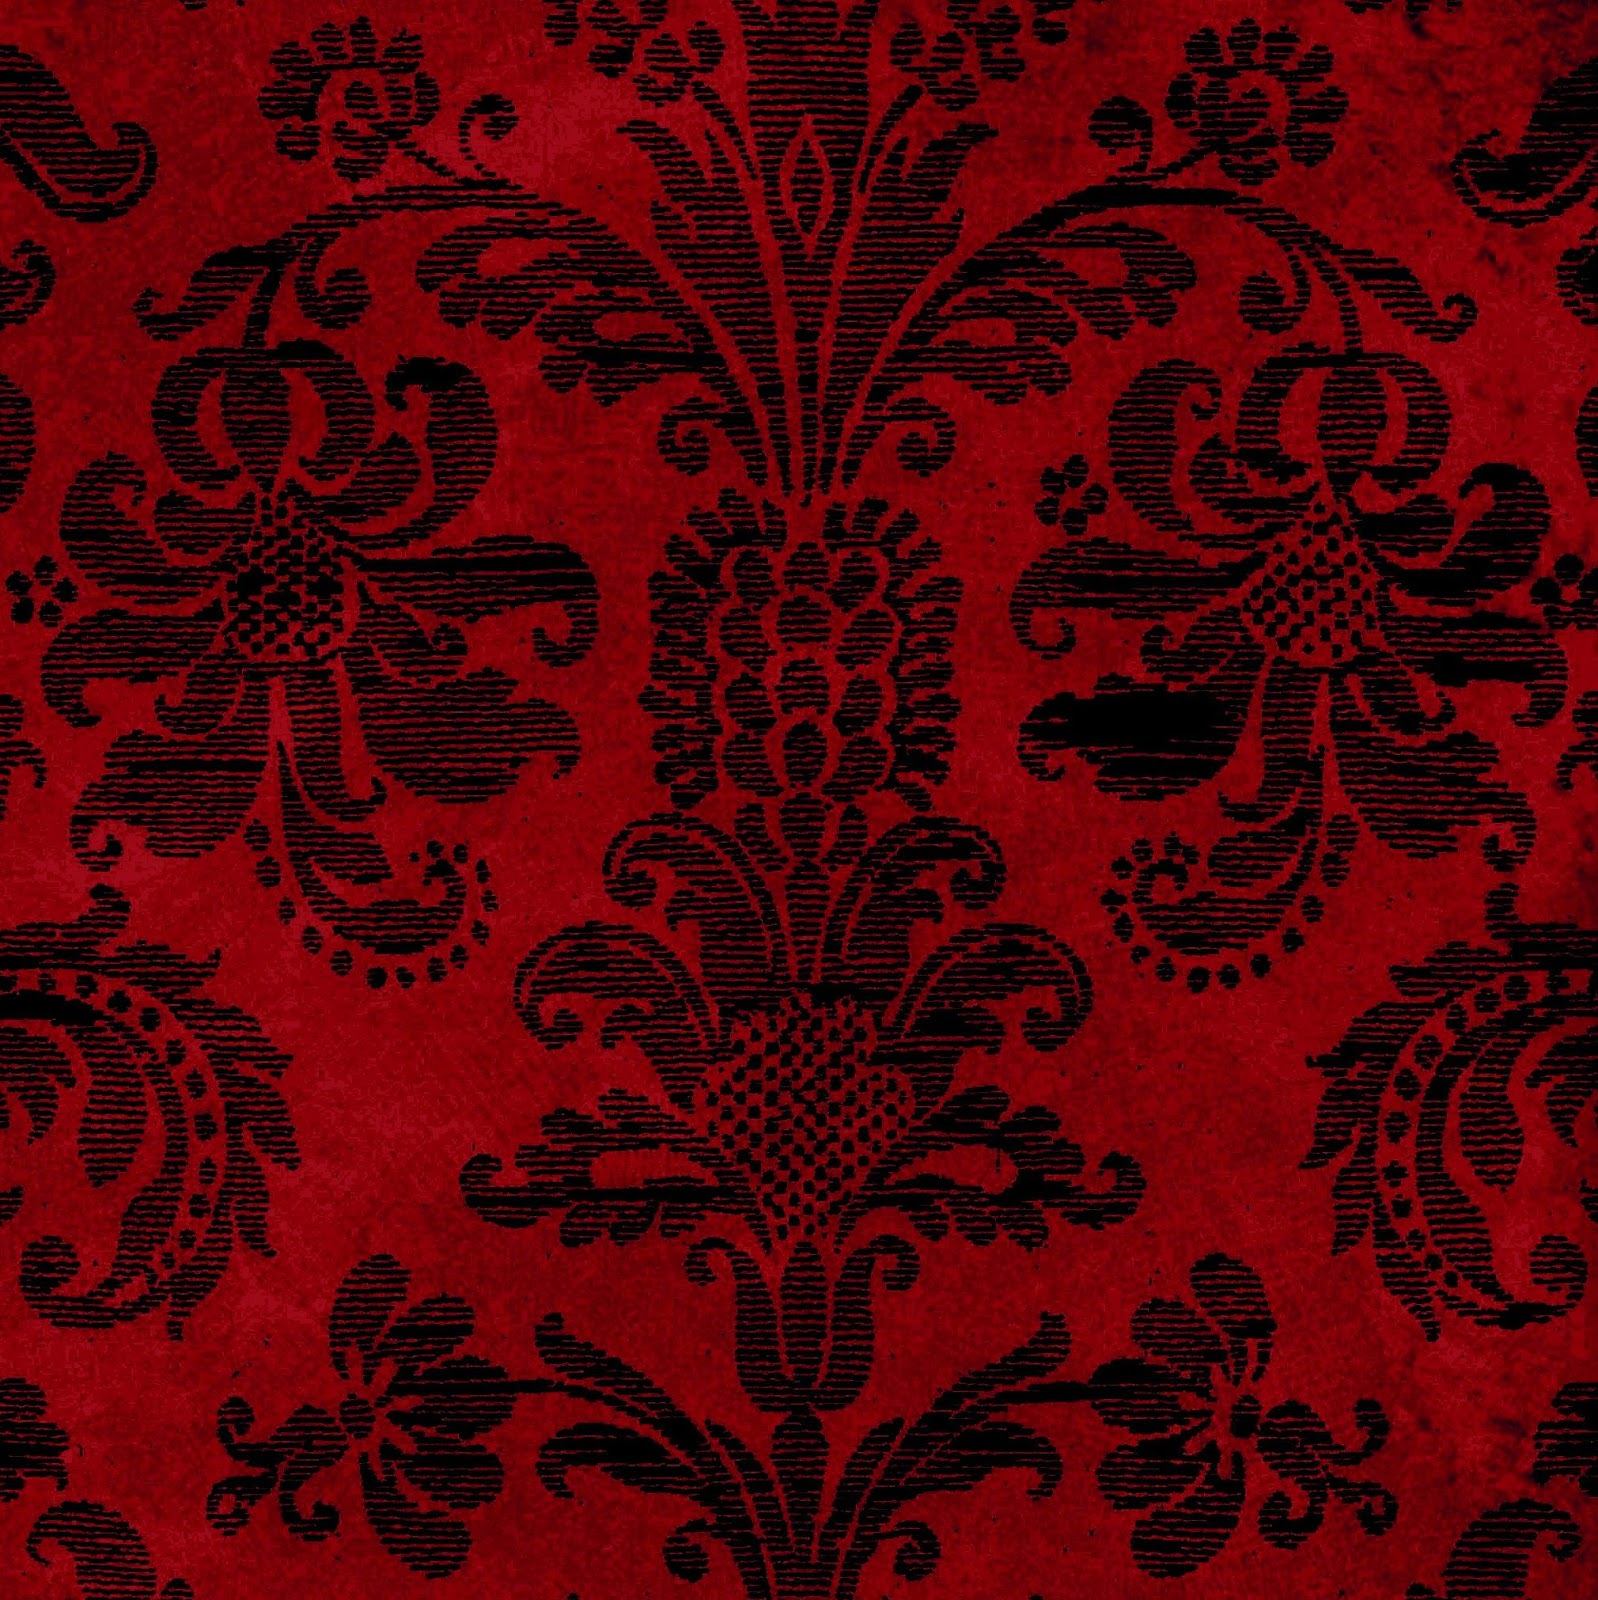 Image Red And Black Damask Pc Android iPhone iPad Wallpaper